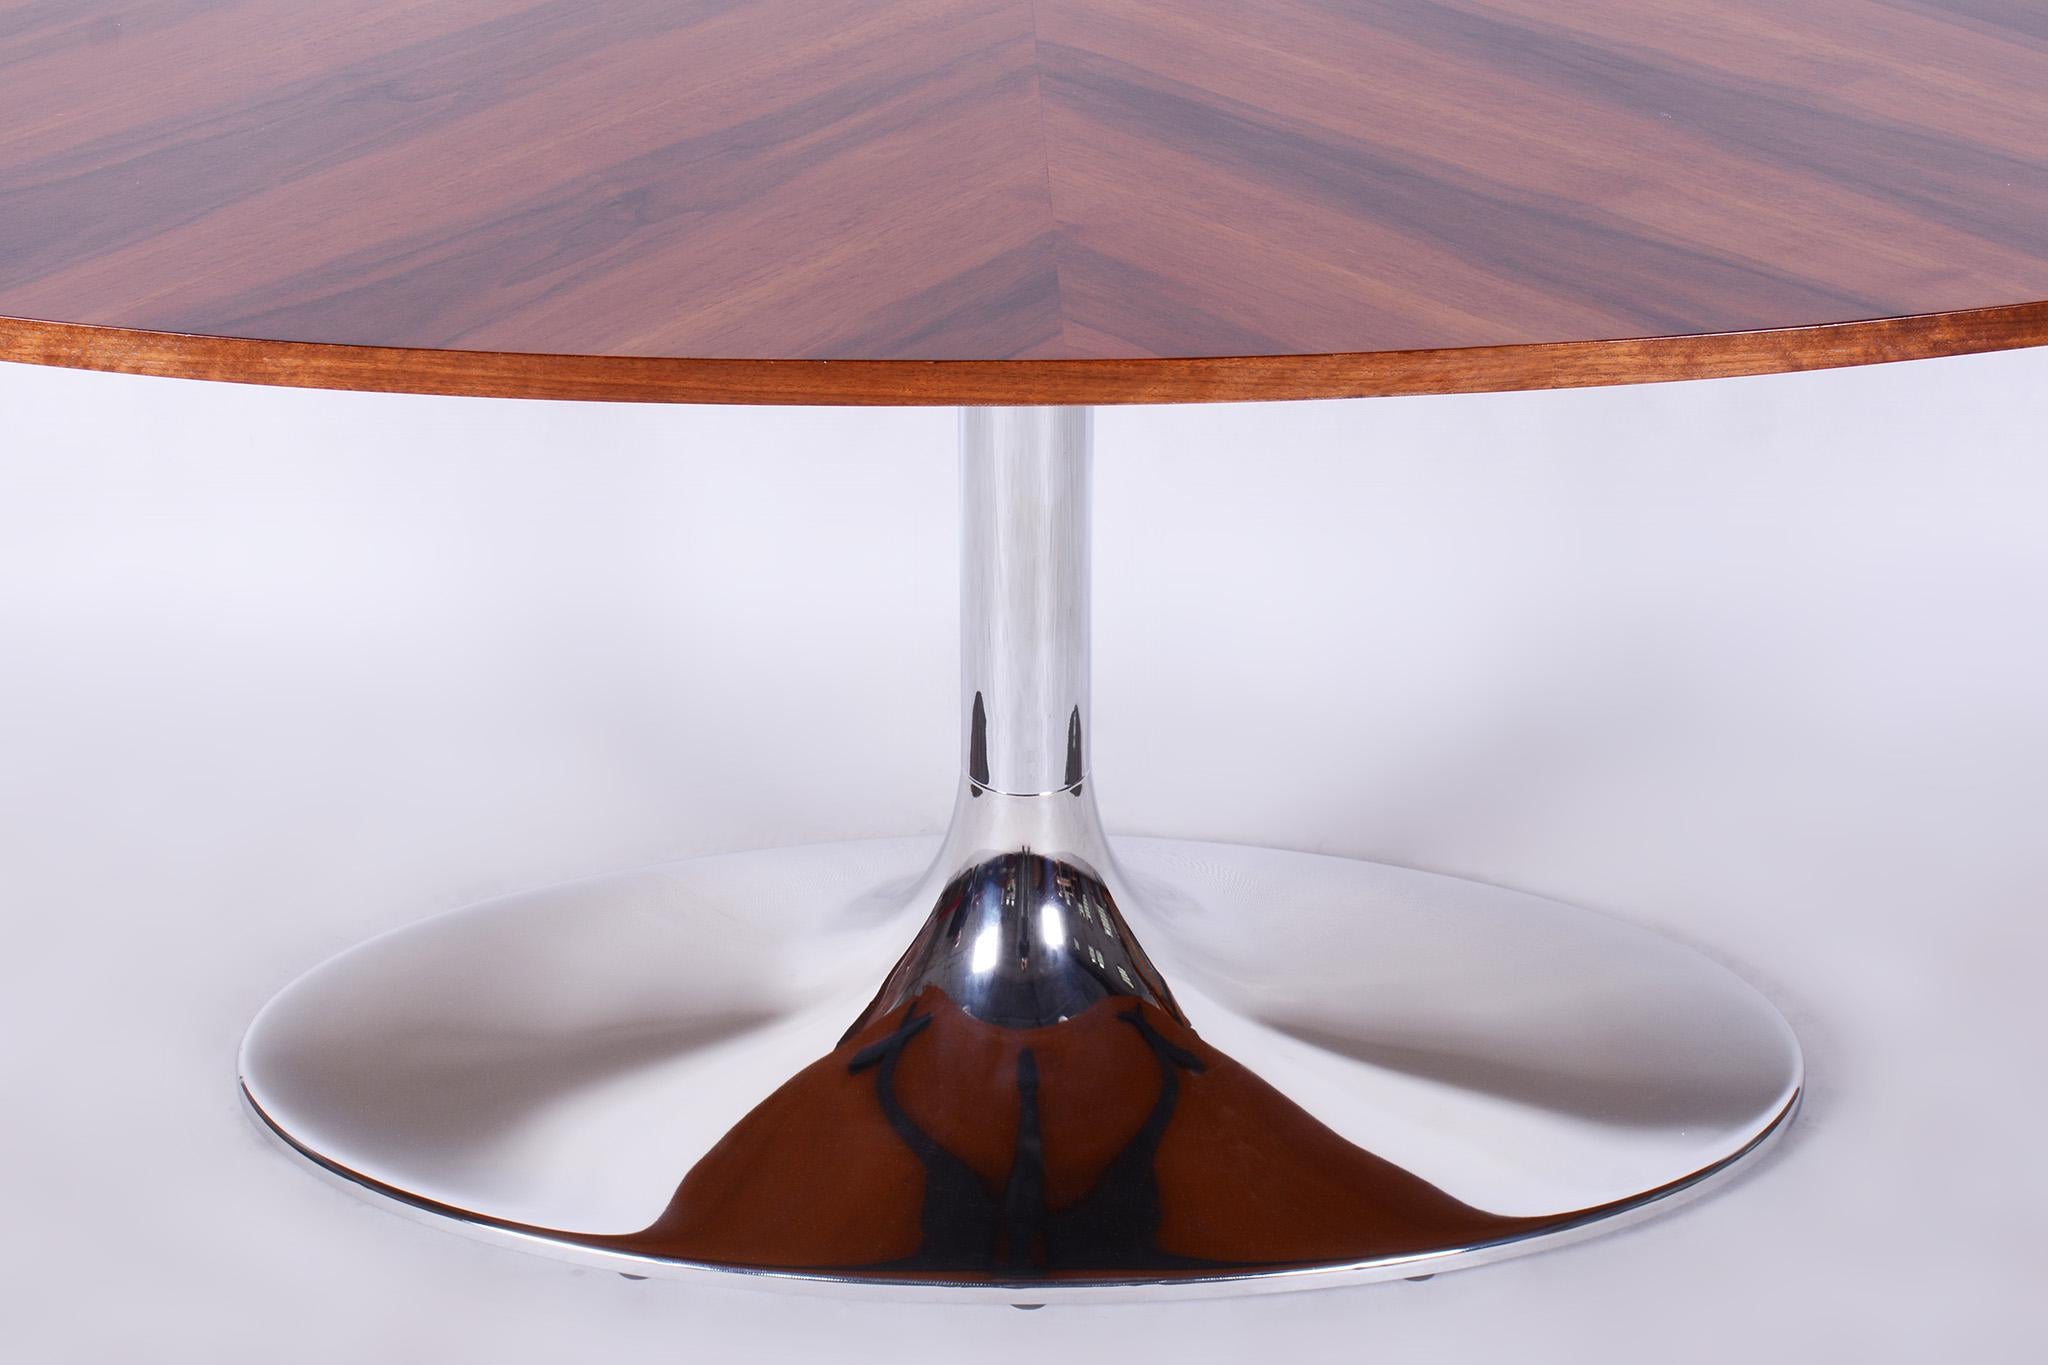 Restored Oval Table, Functionalism, Kovona, Chrome, Walnut, Czechia, 1960s In Good Condition For Sale In Horomerice, CZ